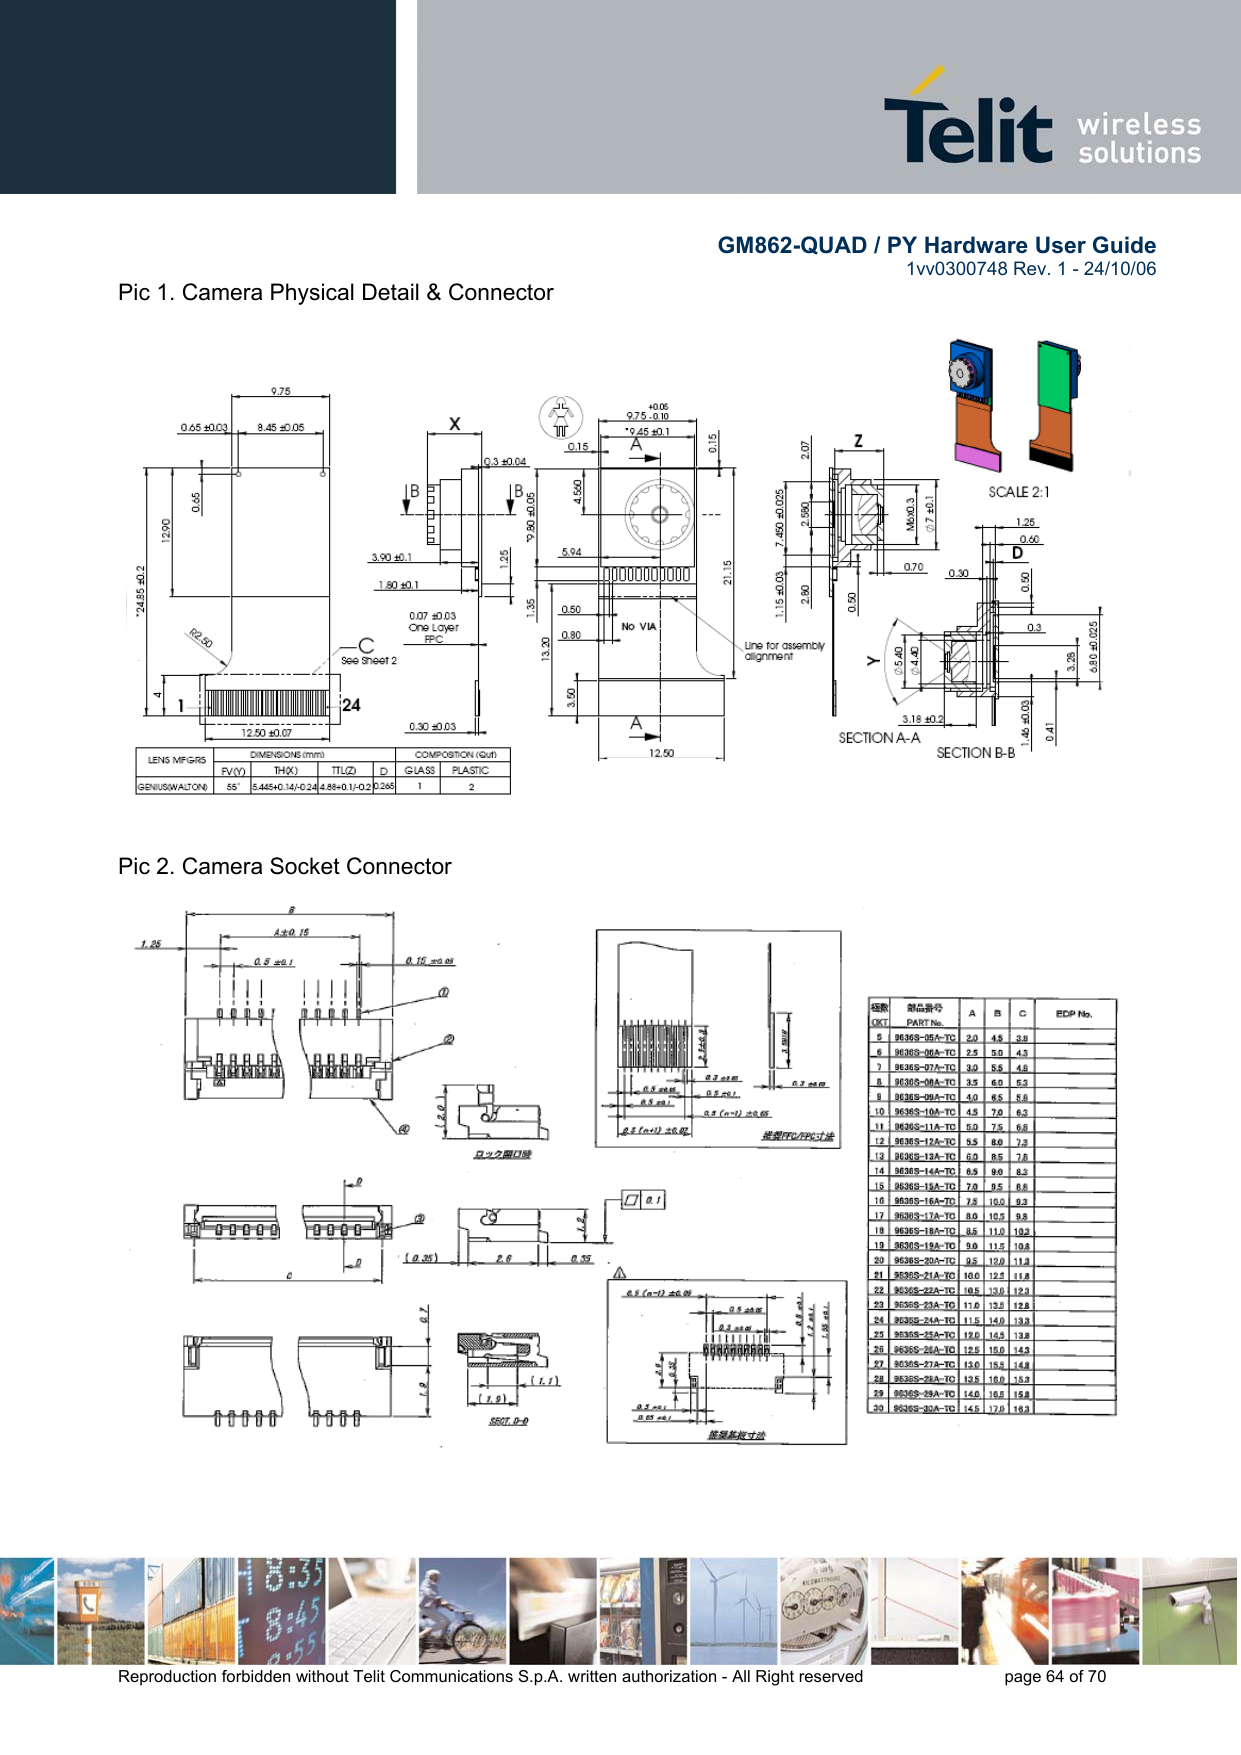        GM862-QUAD / PY Hardware User Guide   1vv0300748 Rev. 1 - 24/10/06    Reproduction forbidden without Telit Communications S.p.A. written authorization - All Right reserved    page 64 of 70  Pic 1. Camera Physical Detail &amp; Connector   Pic 2. Camera Socket Connector  